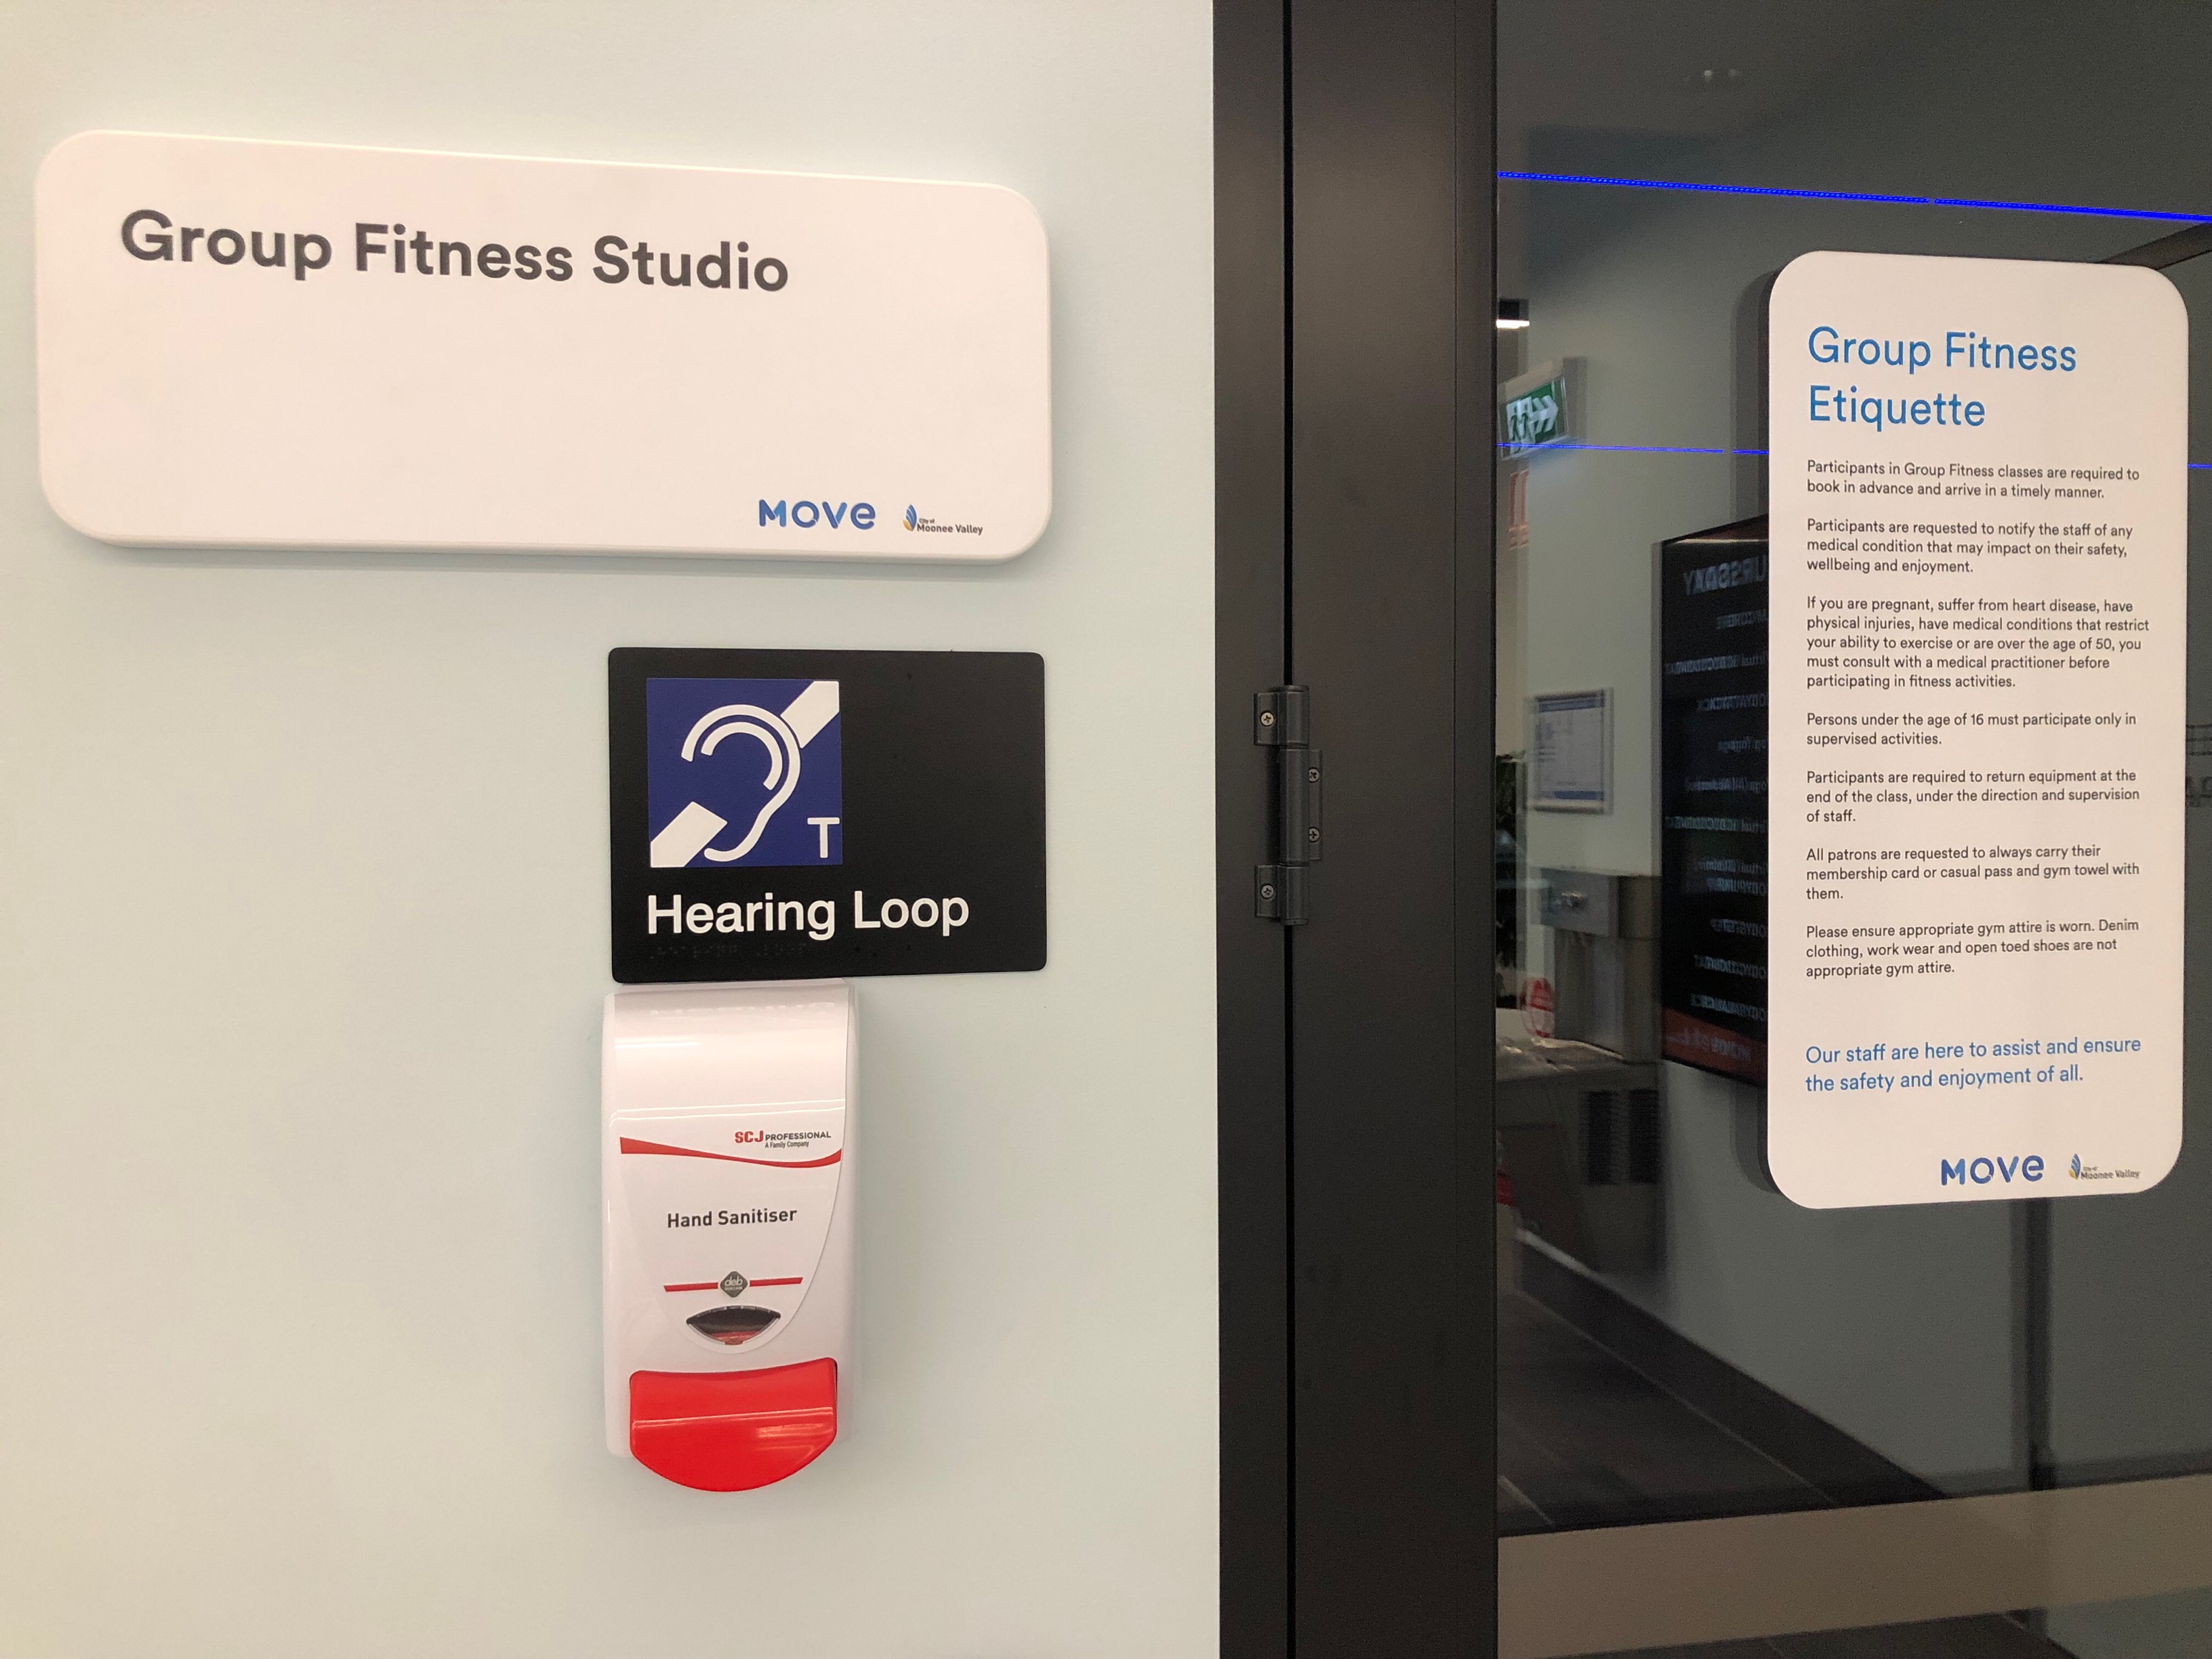 Image of group fitness studio entrance door with Hearing Loop signage